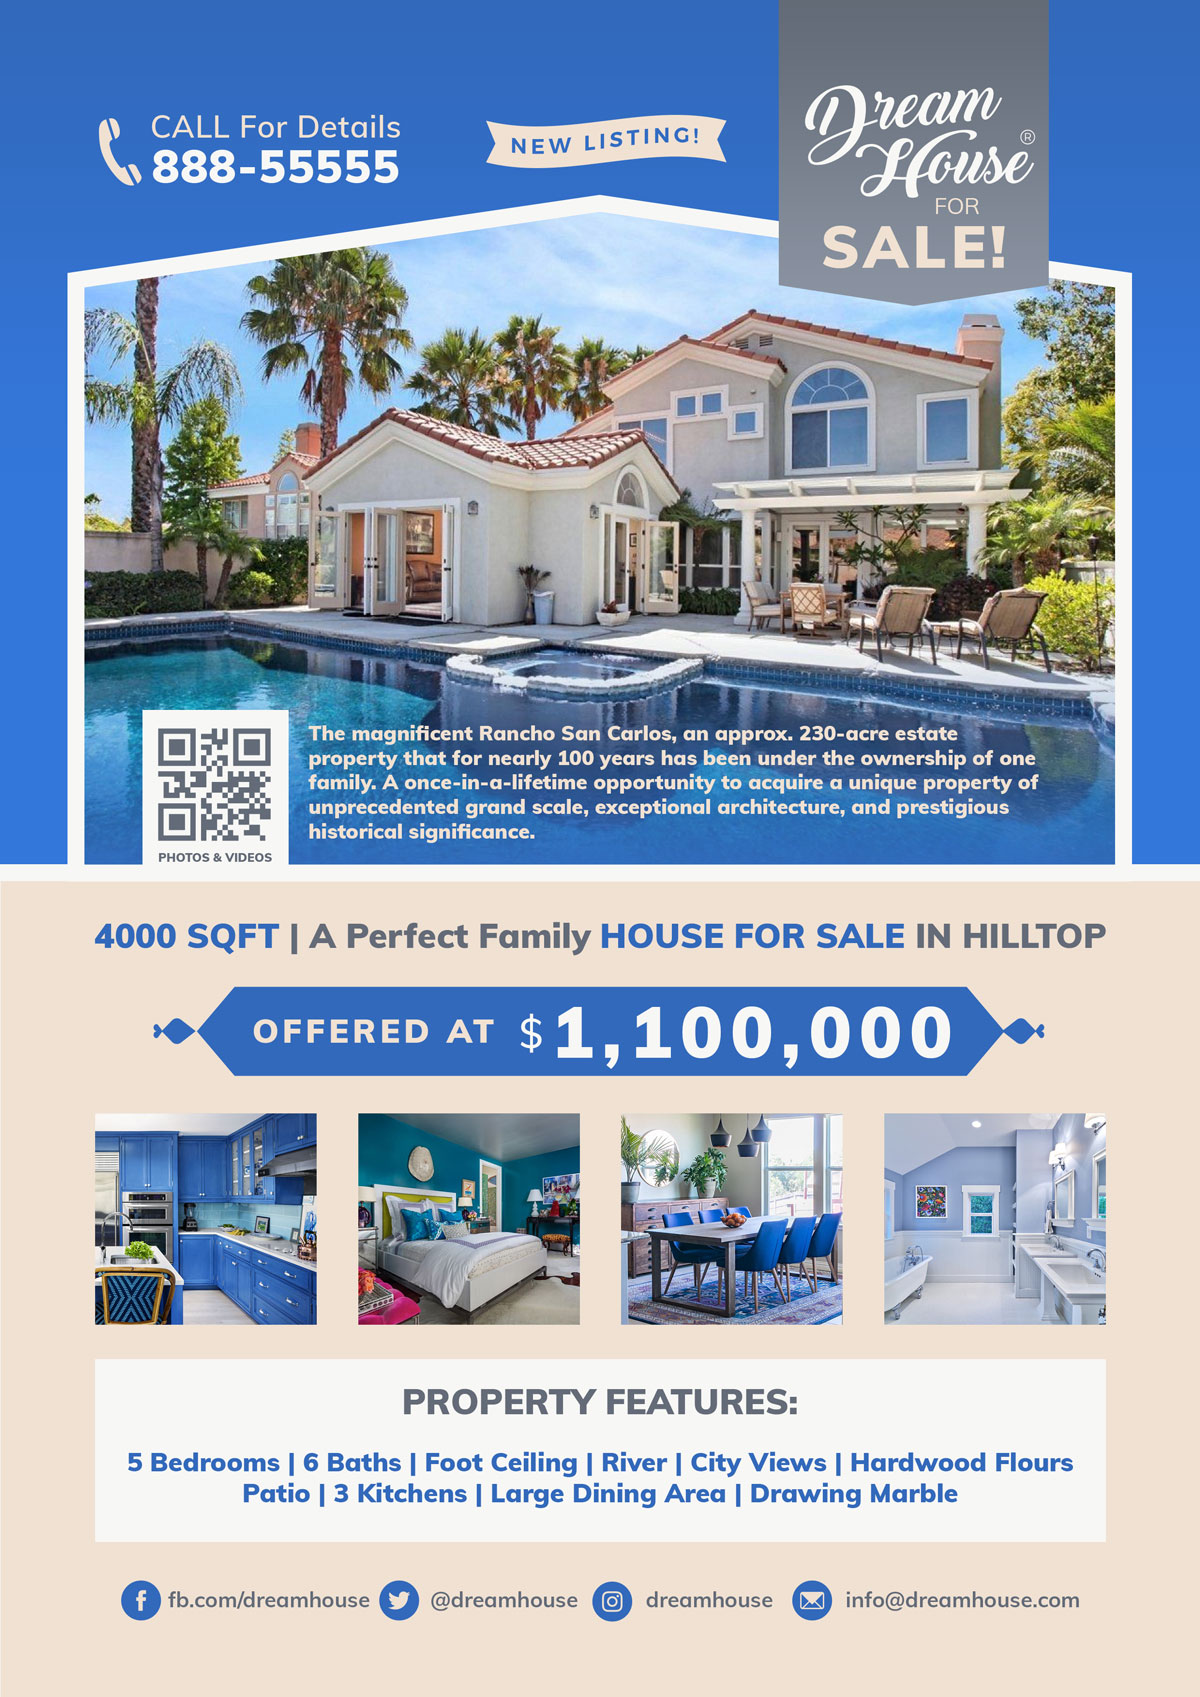 Free Real Estate / House for Sale Flyer Template in PSD - Designbolts Inside Free House For Sale Flyer Templates